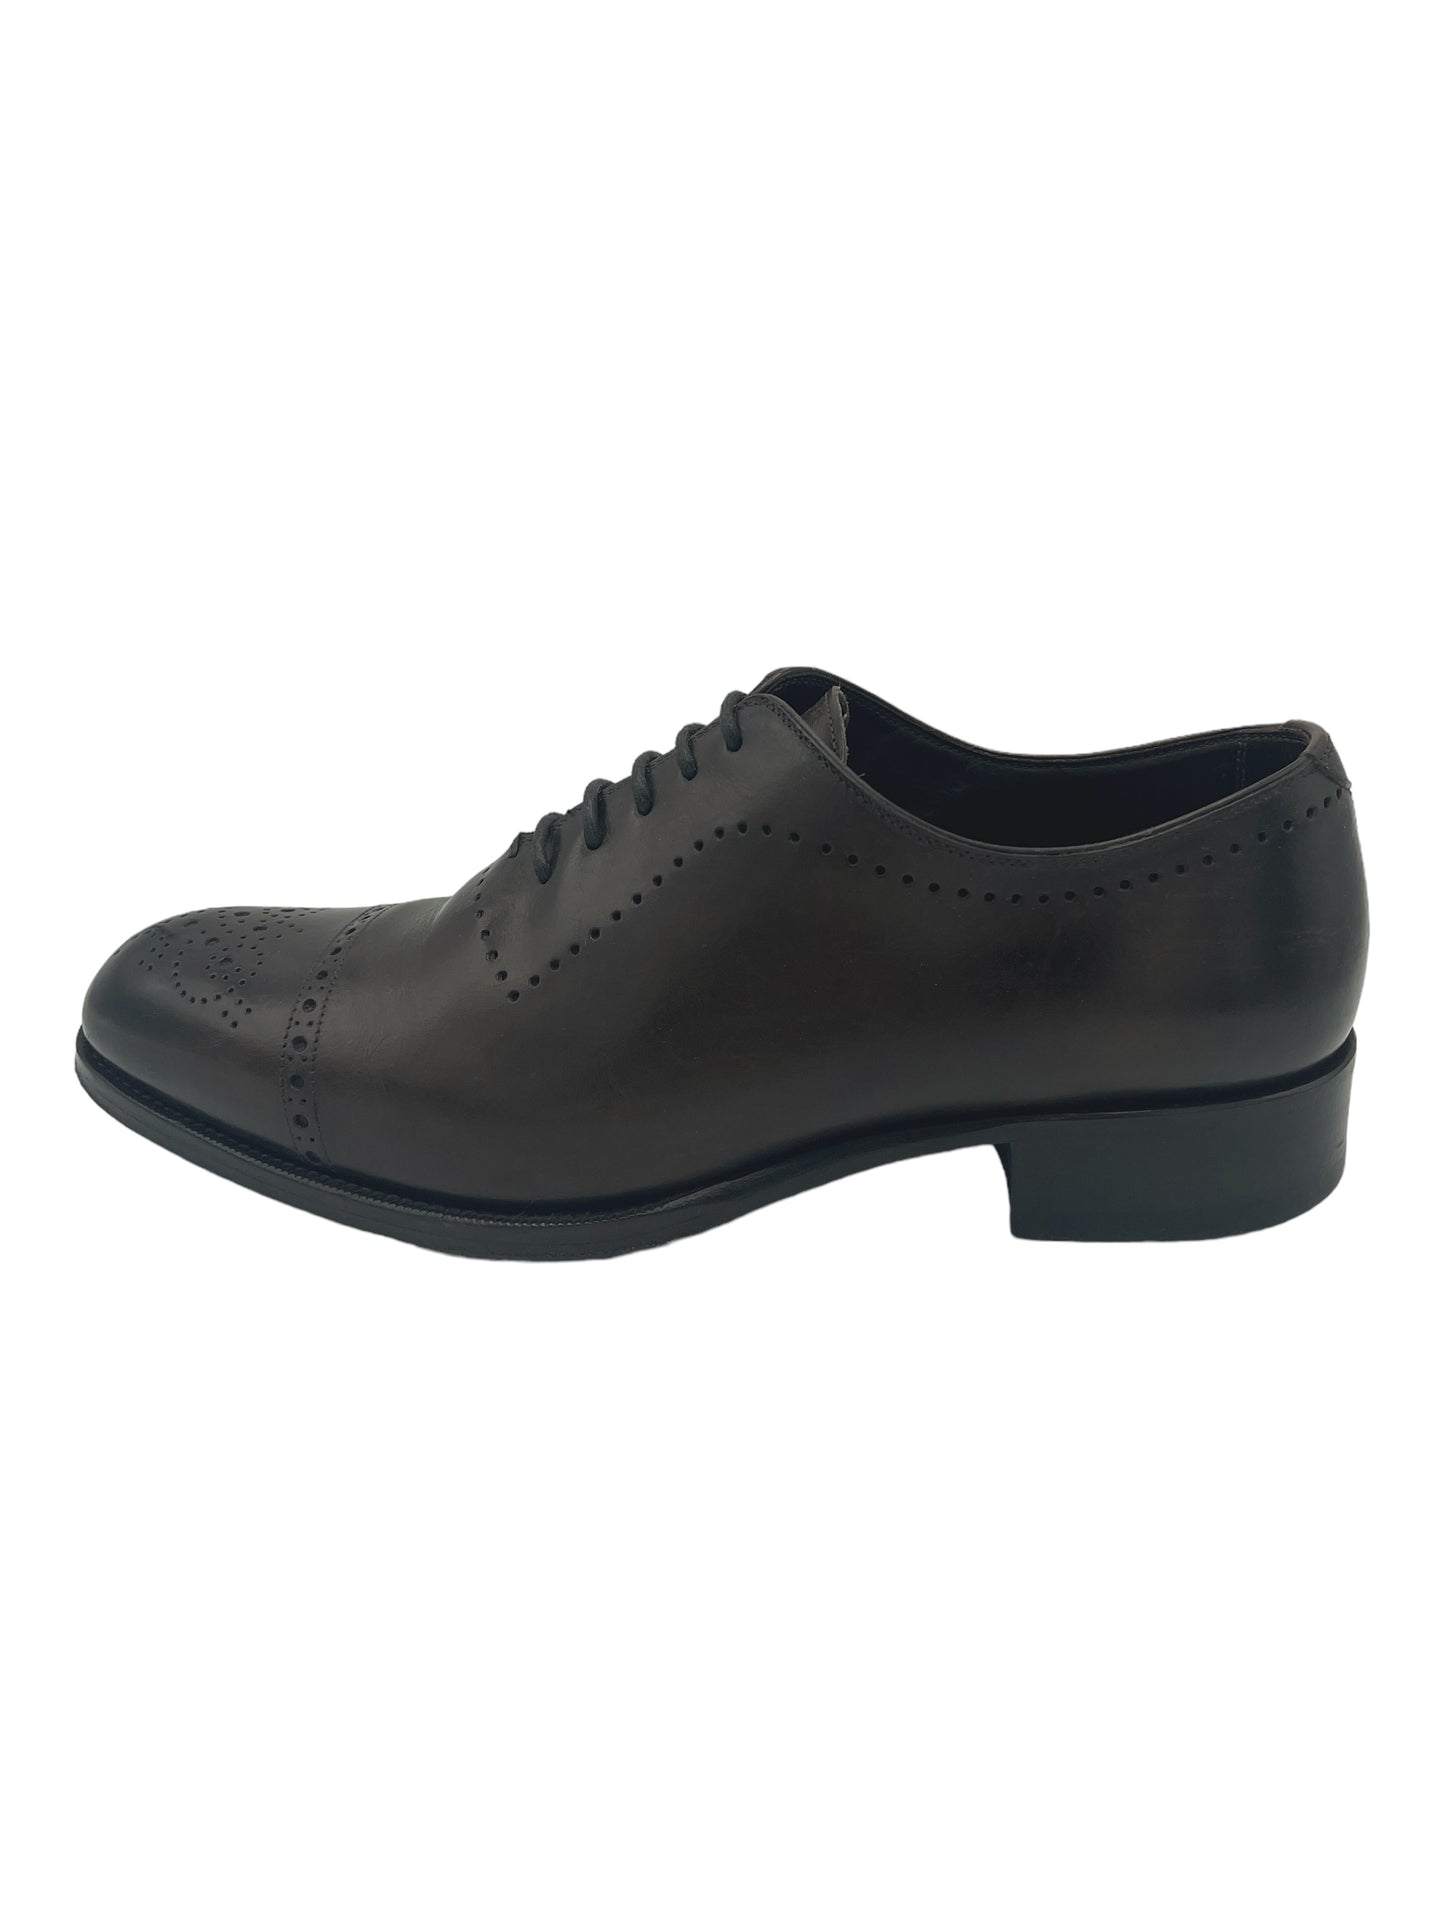 Tom Ford Dark Brown Burnished Leather Edgar Brogue Lace Up